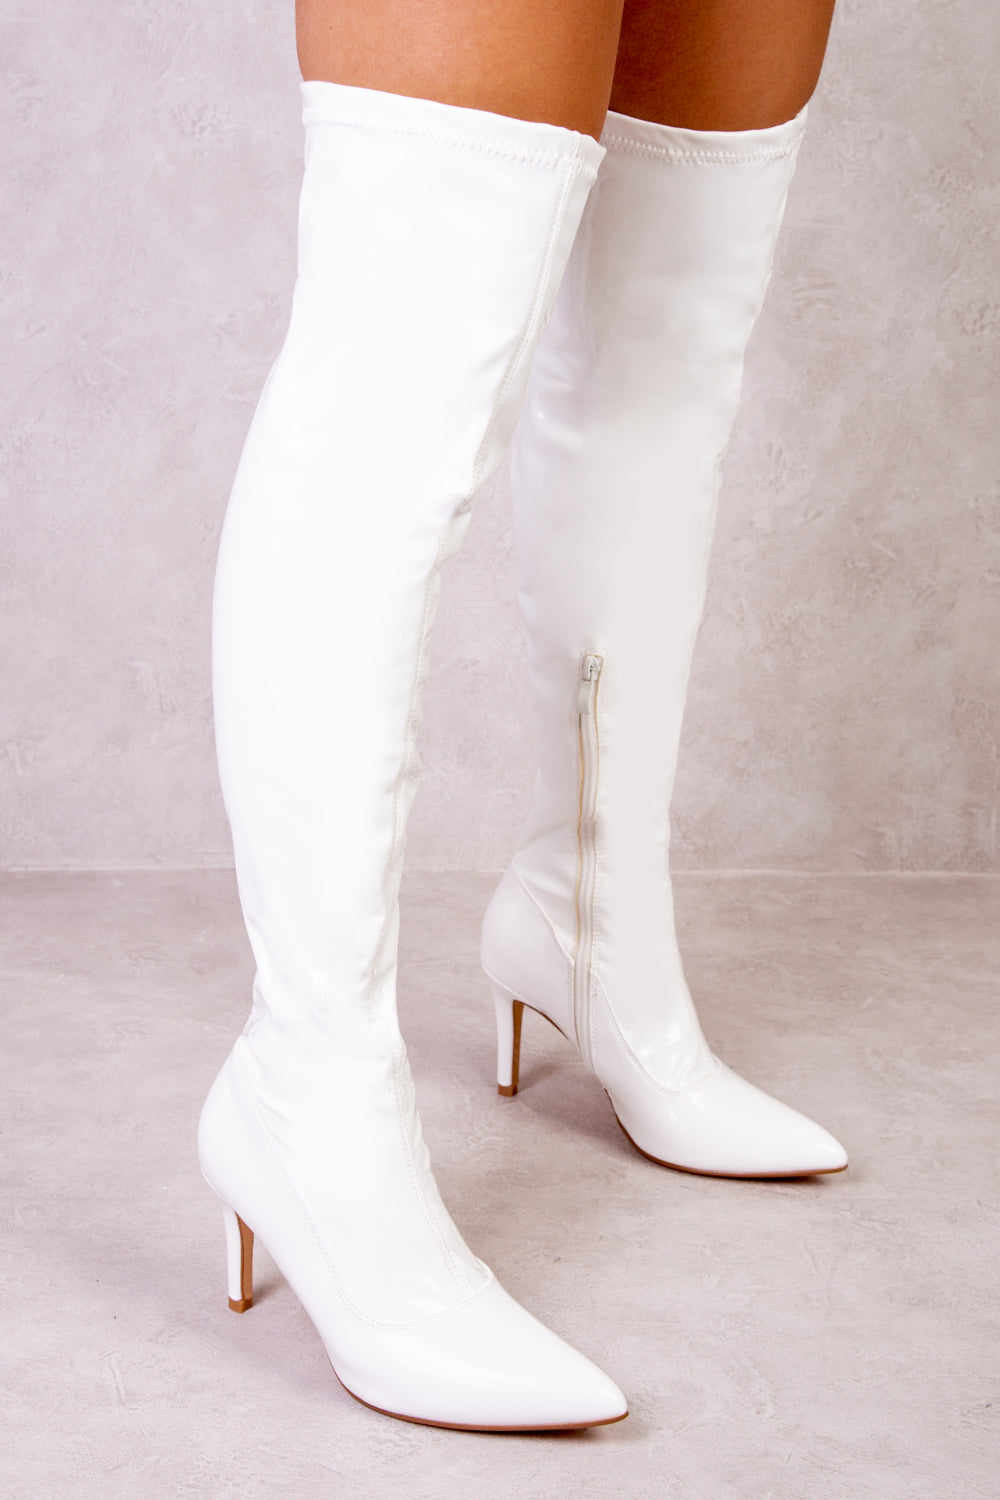 LEXI OVER THE KNEE BOOTS WITH STILETTO HEELS IN WHITE PATENT FAUX LEATHER